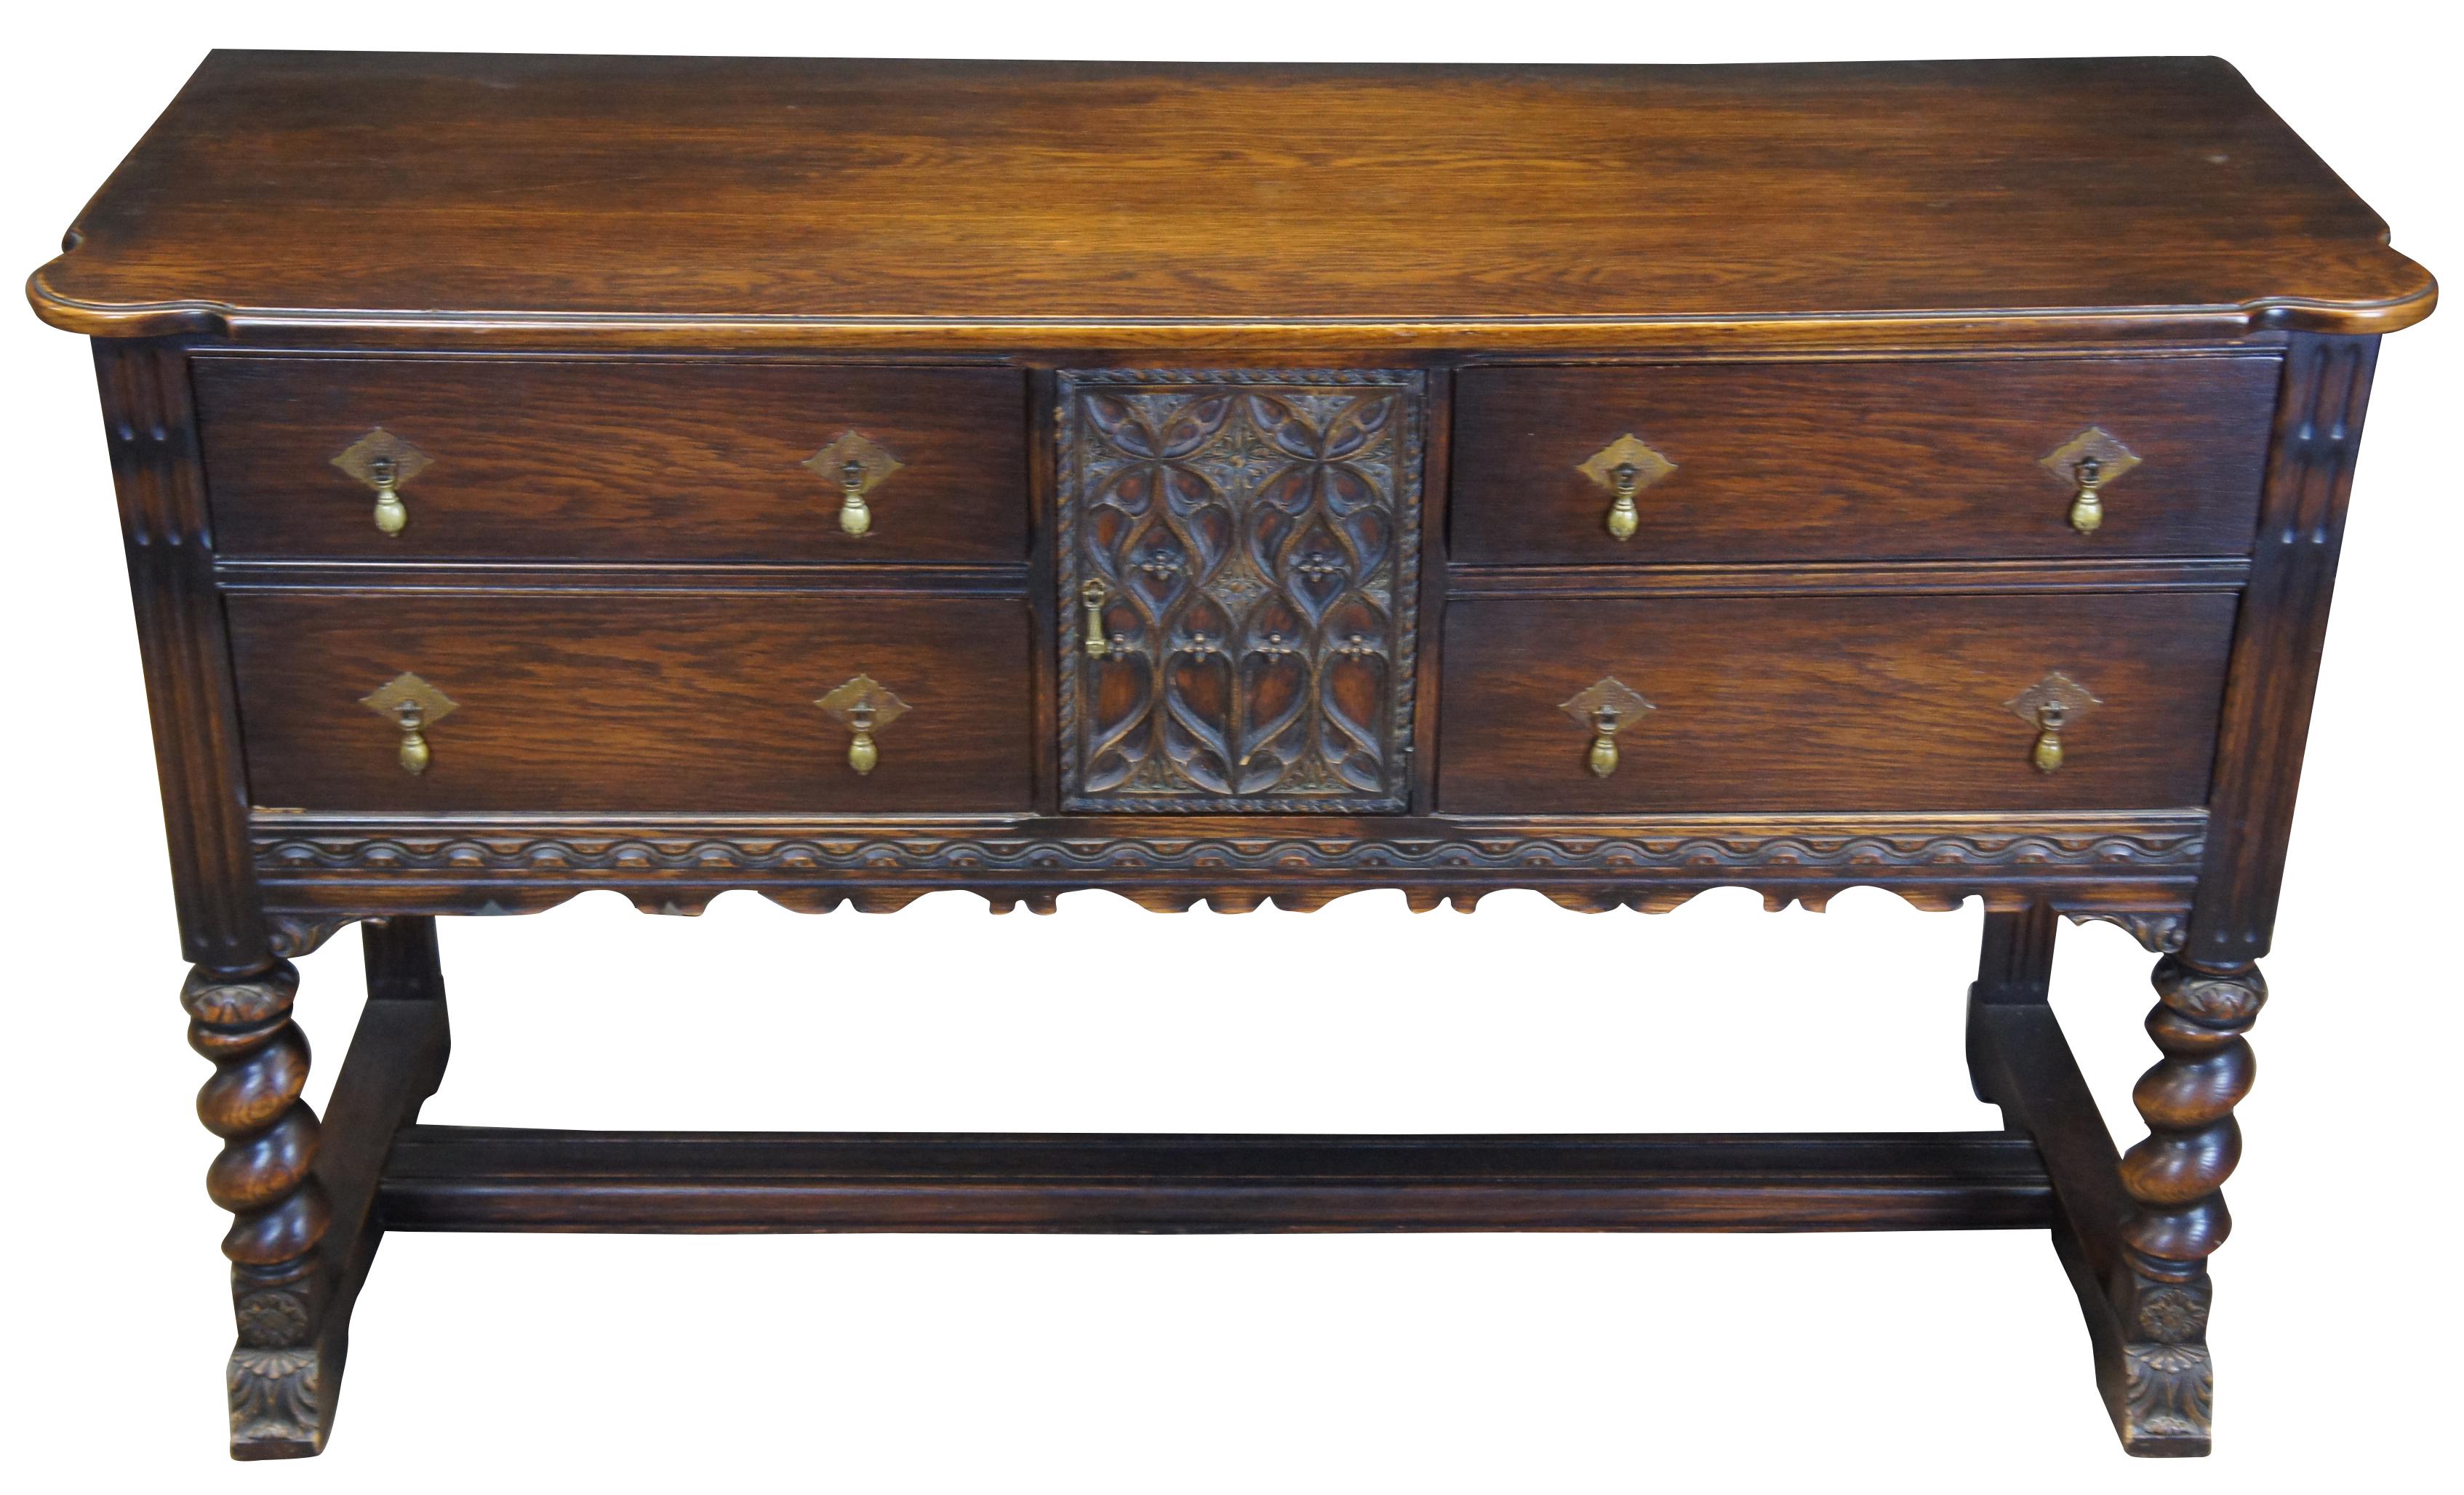 Early 20th century Spanish Revival buffet. Made from oak with intricately carved details. Barley twist legs and trestle base. Features four drawers and center cabinet with brass hardware.
 